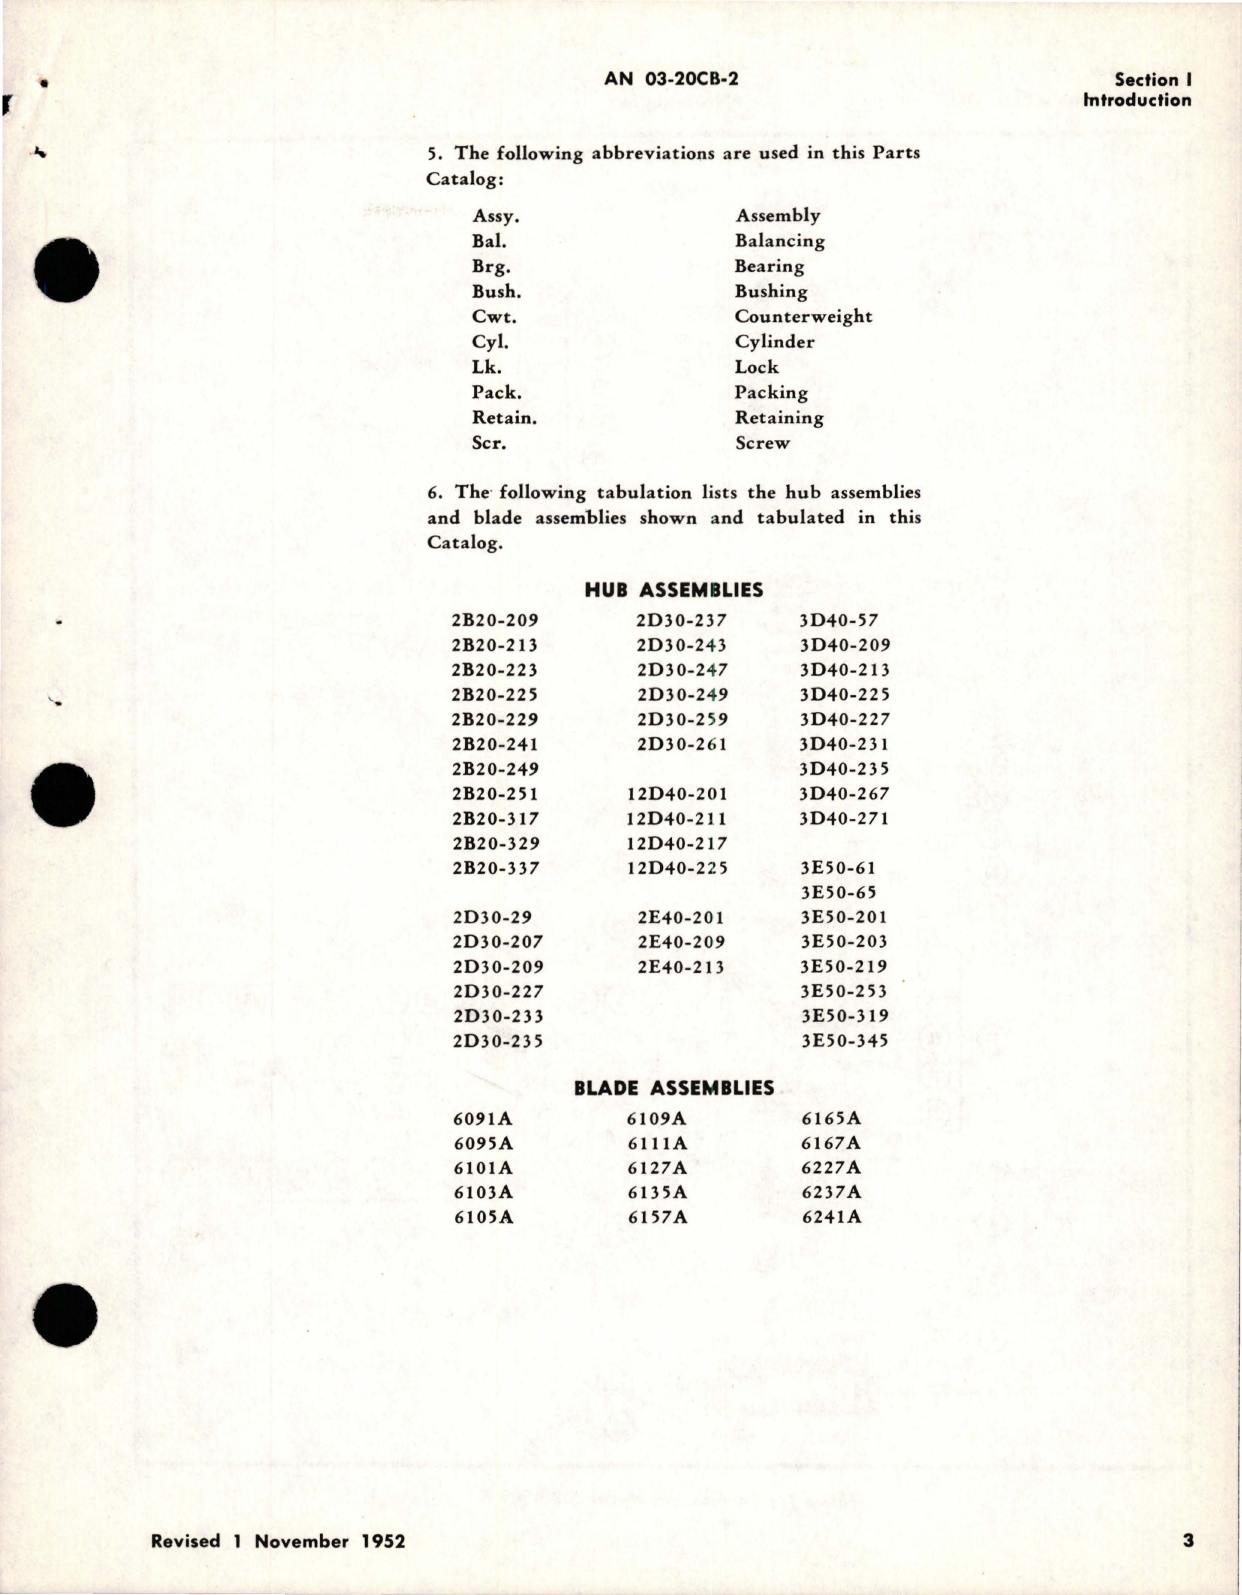 Sample page 5 from AirCorps Library document: Parts Catalog for Counterweight Propellers - Hub Models 2B20, 2D30, 2E40, 3D40, 3E50, and 12D40